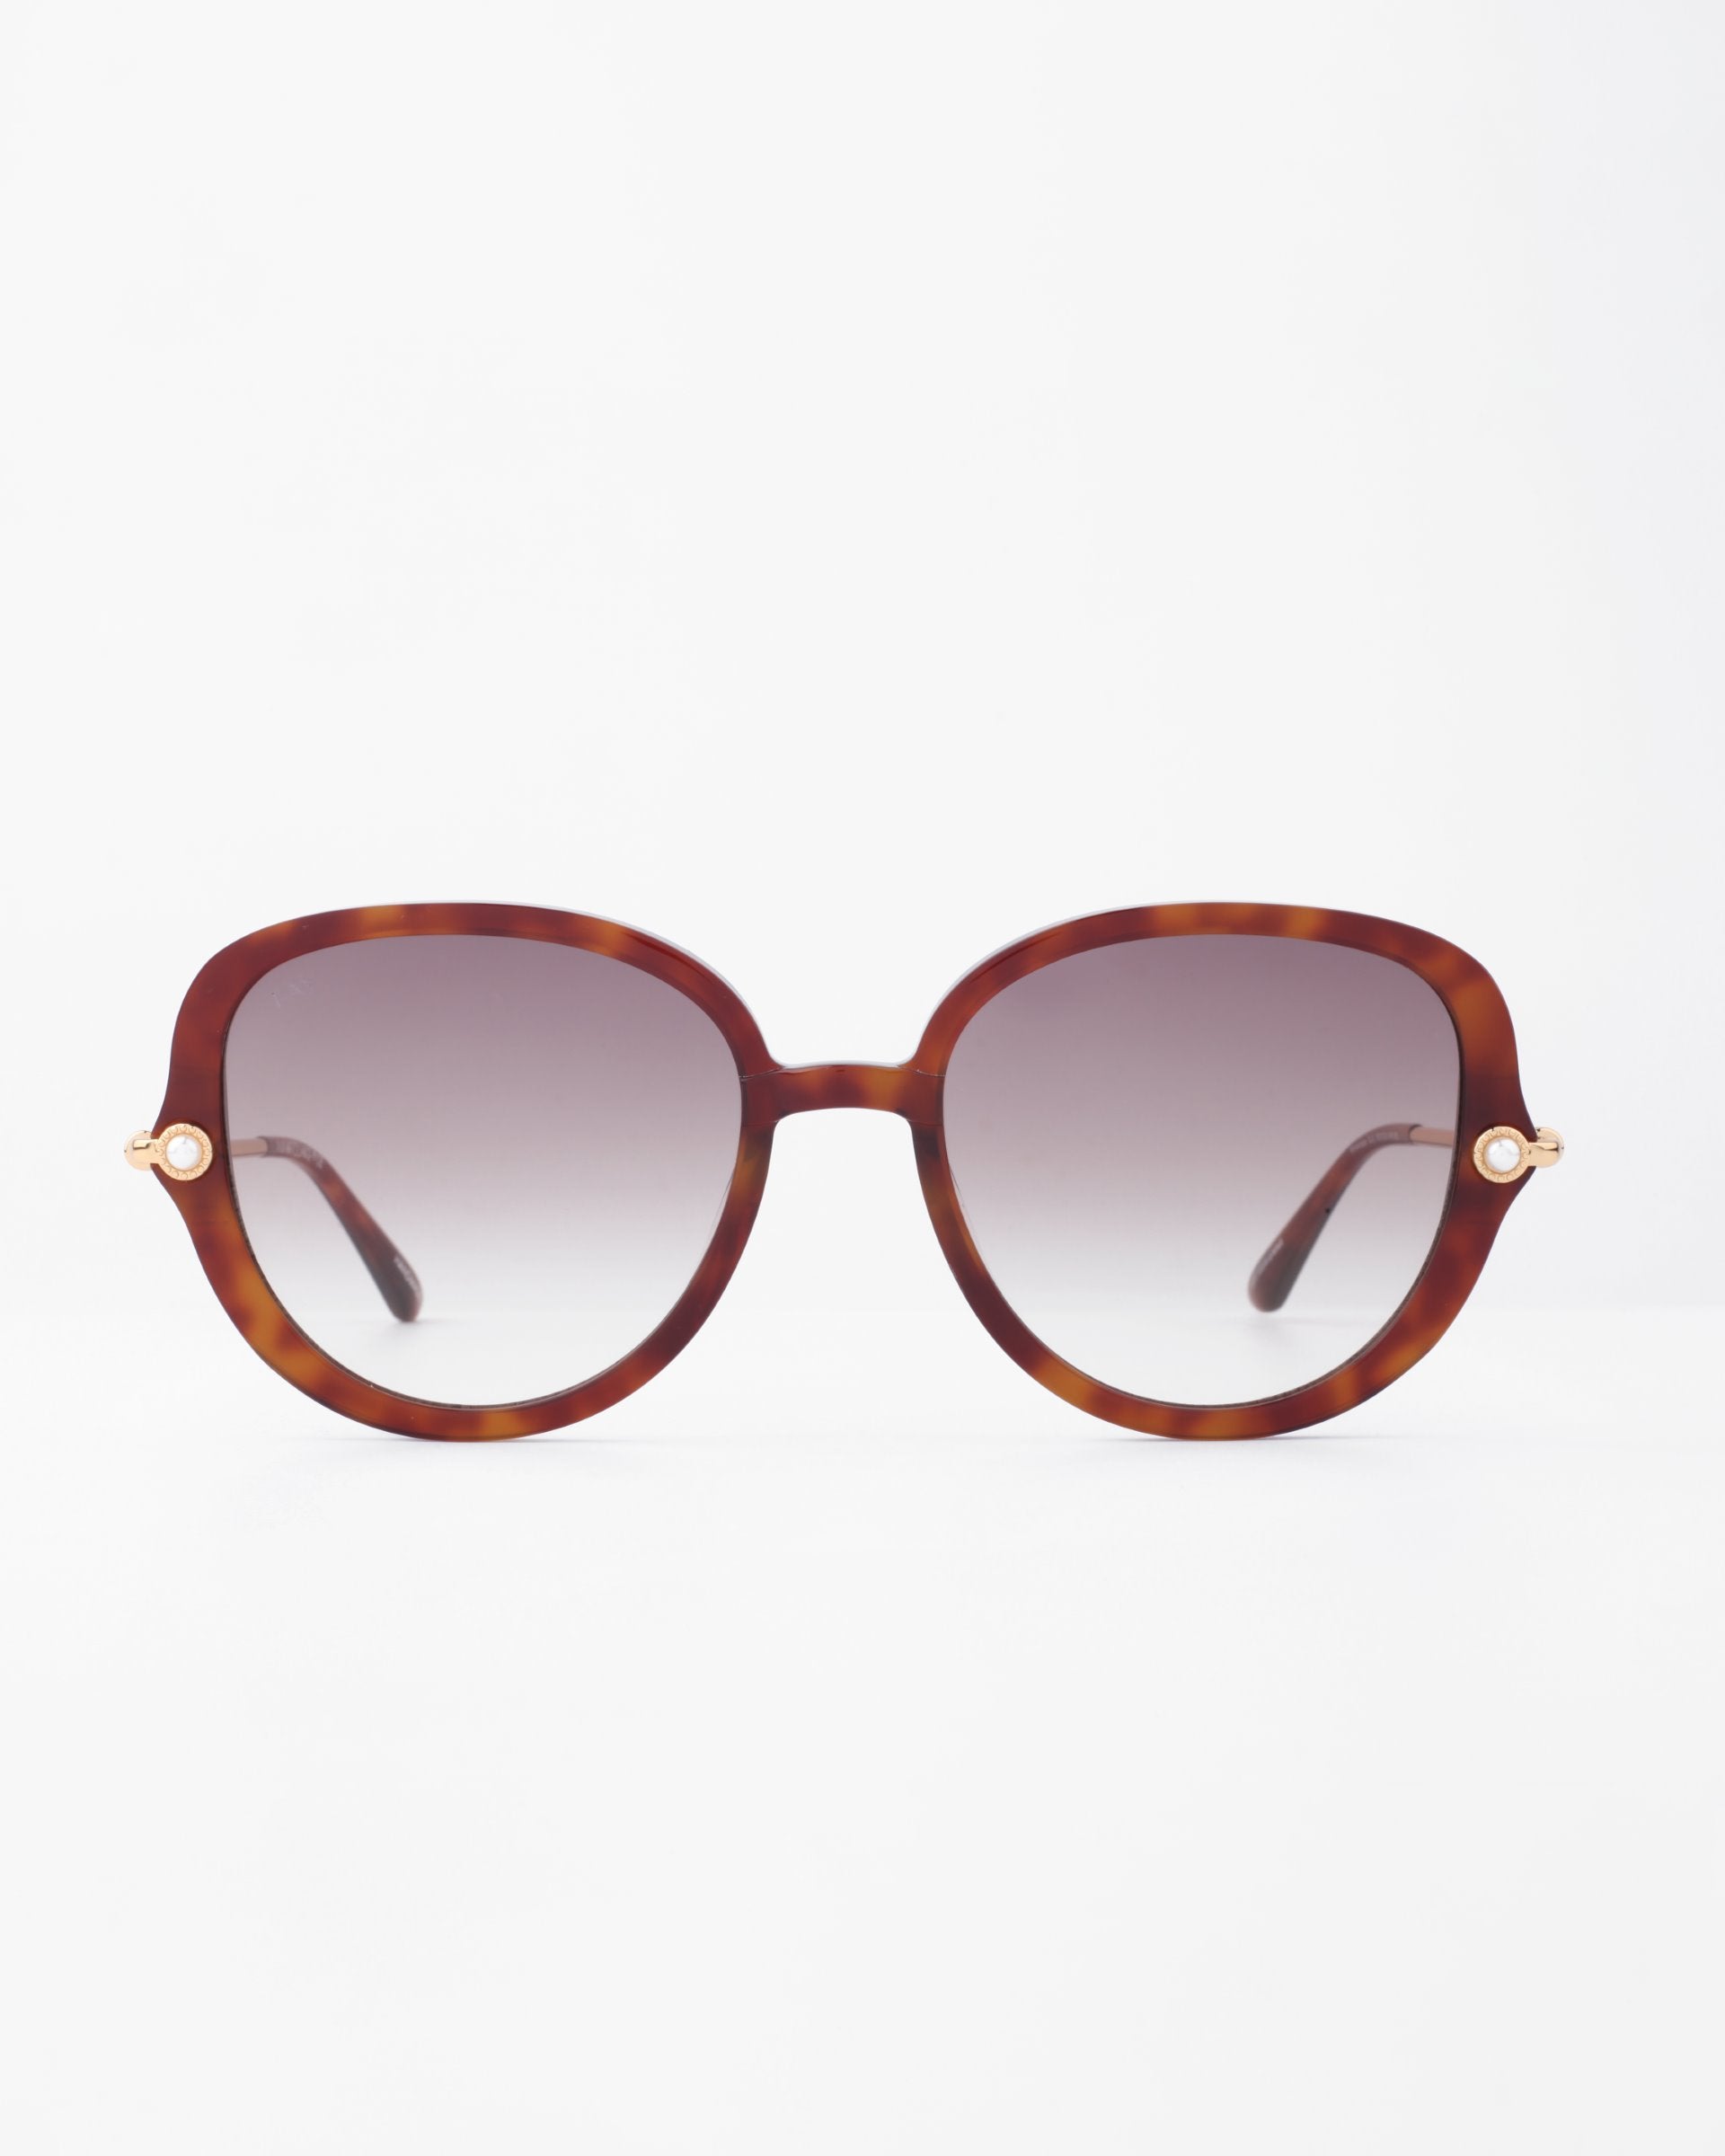 A pair of oversized, square-shaped Primrose sunglasses by For Art's Sake® with tortoiseshell frames made from plant-based acetate and gradient brown lenses is centered against a plain white background. Small handmade gold-plated accents are visible on the hinges where the temples meet the frame.